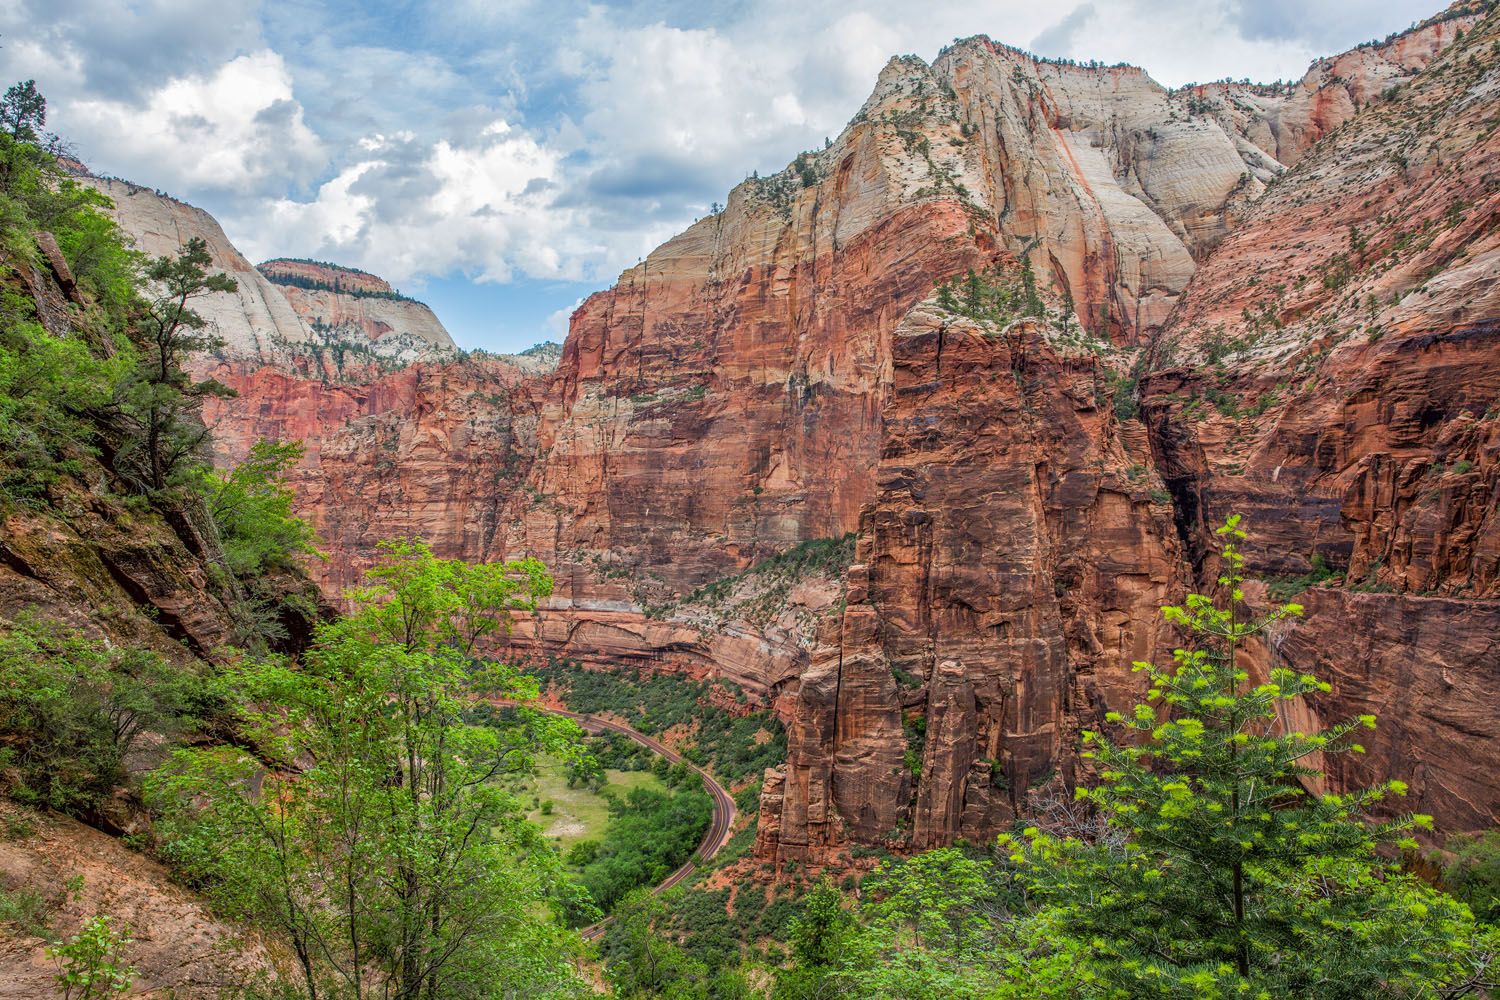 View of Zion National Park from Hidden Canyon Trail